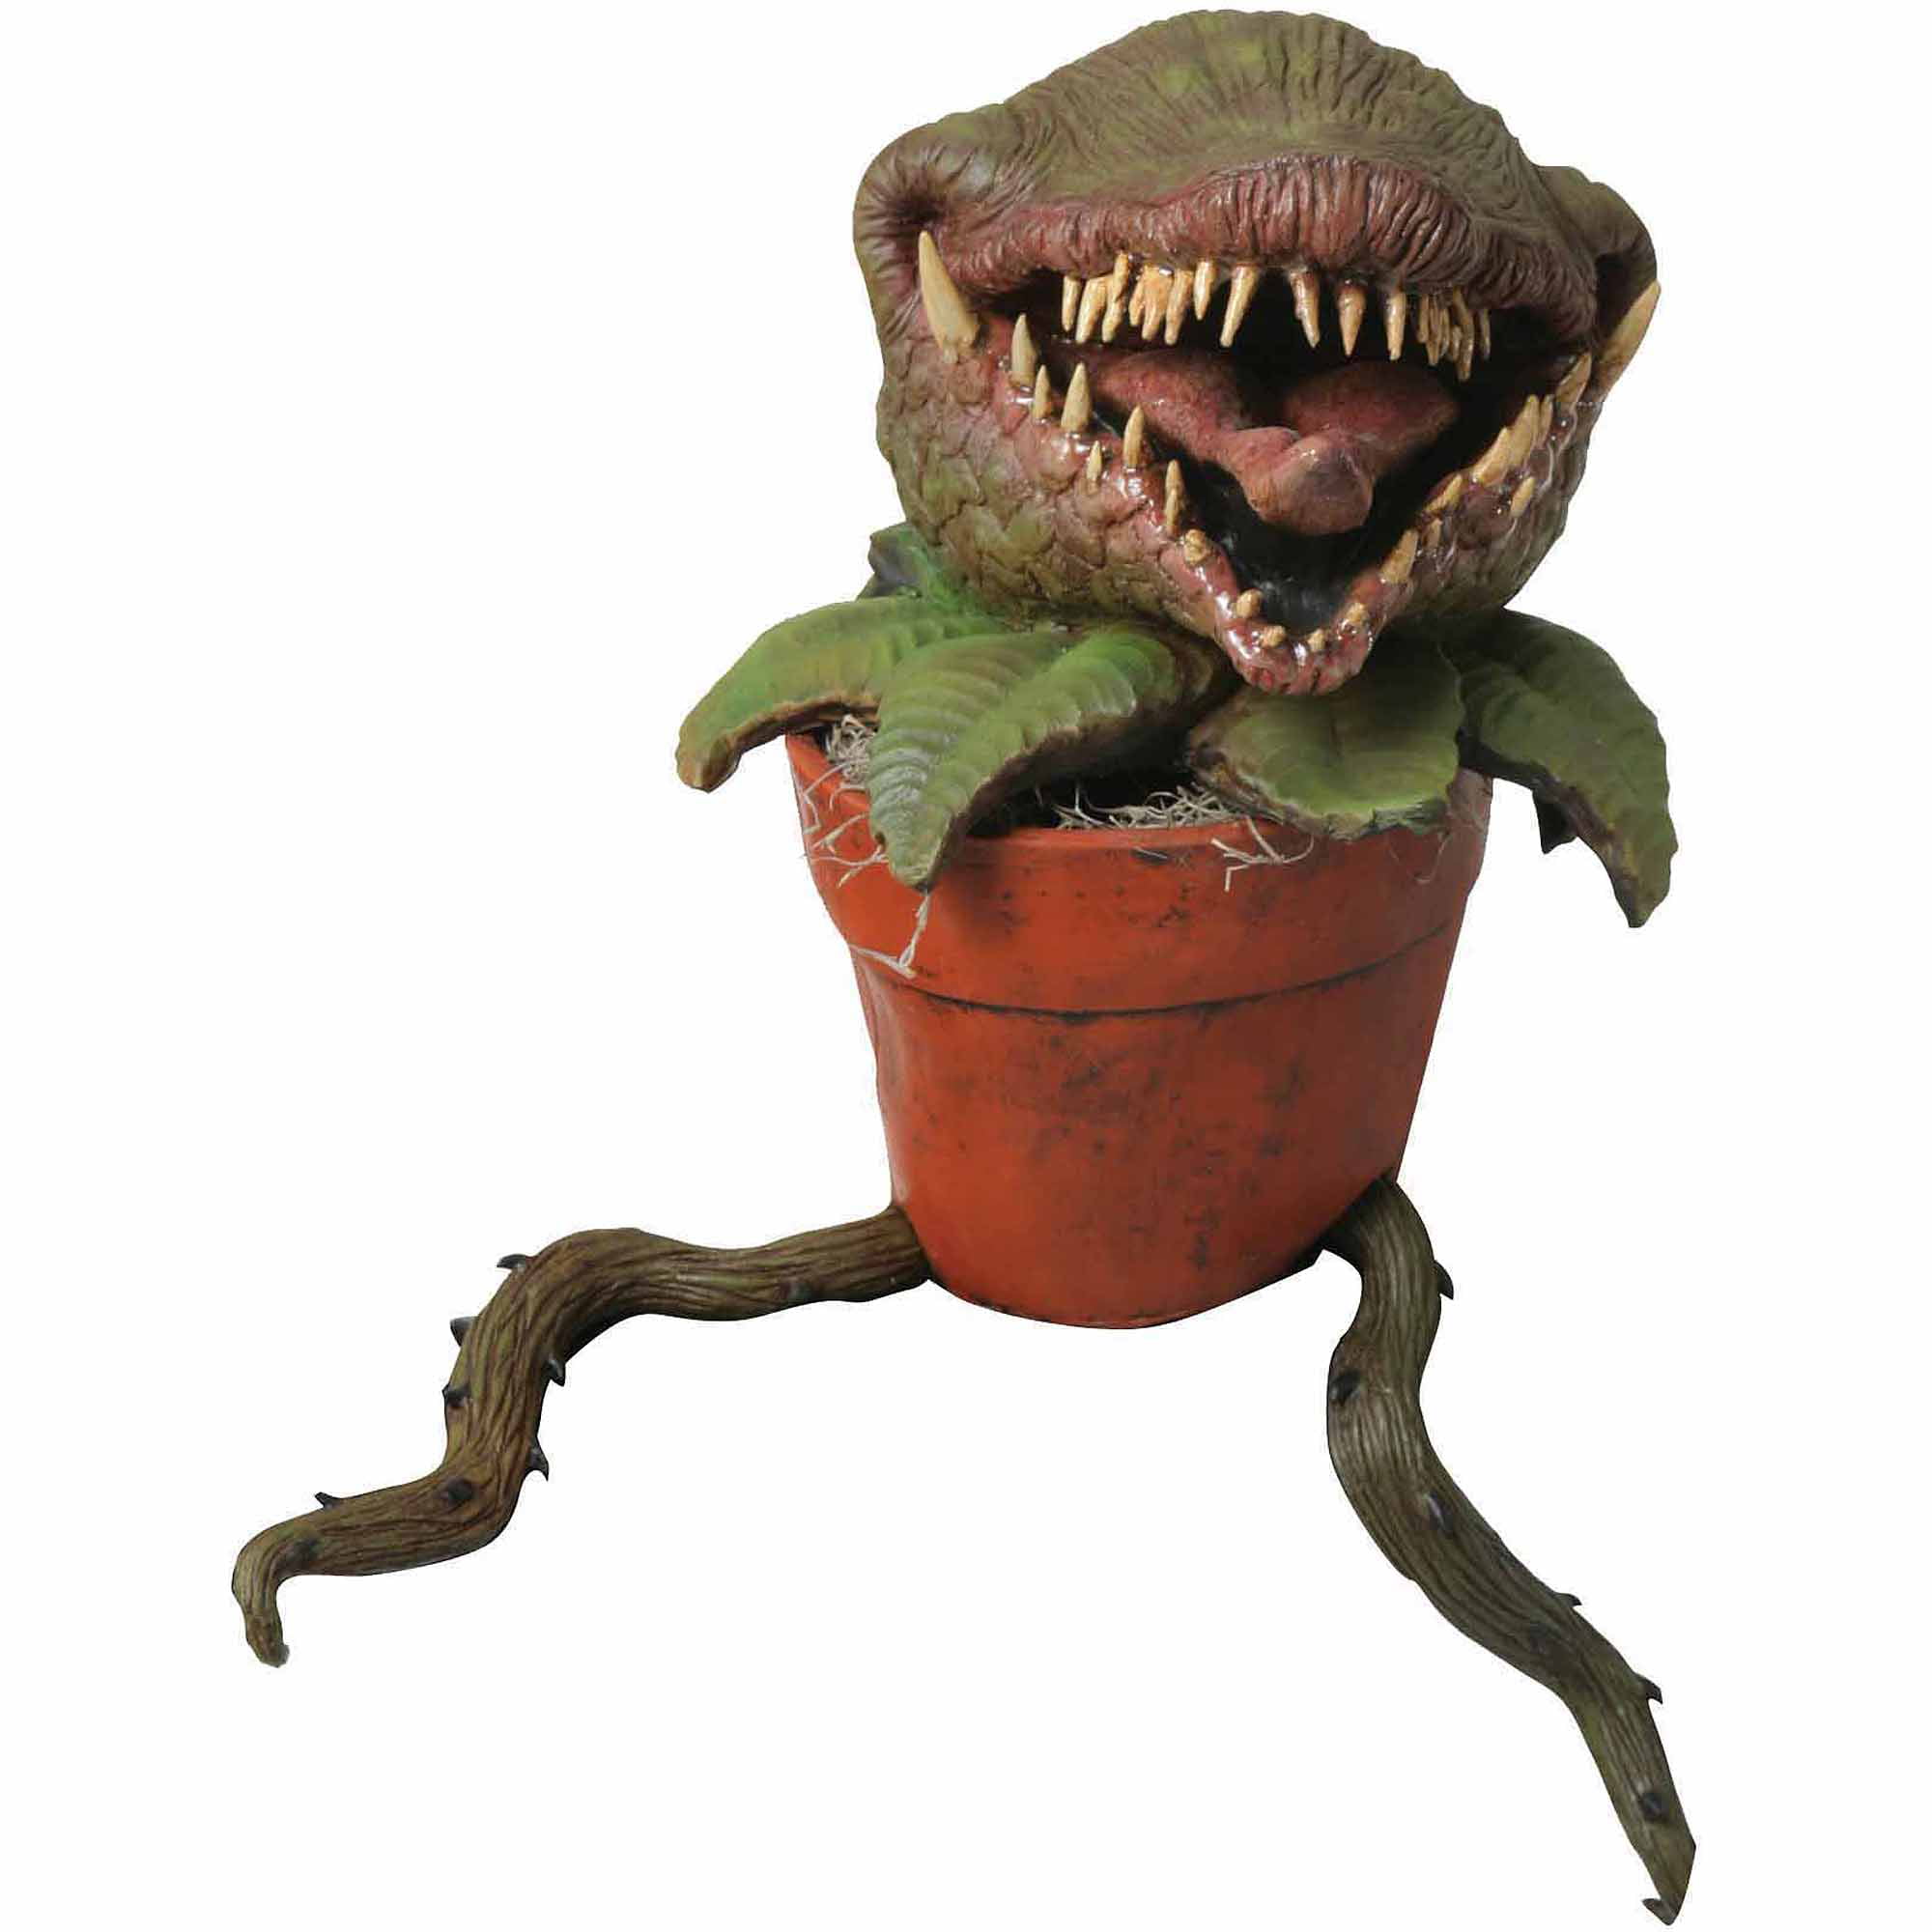 Animated led man eating plant Halloween decoration factory direct.